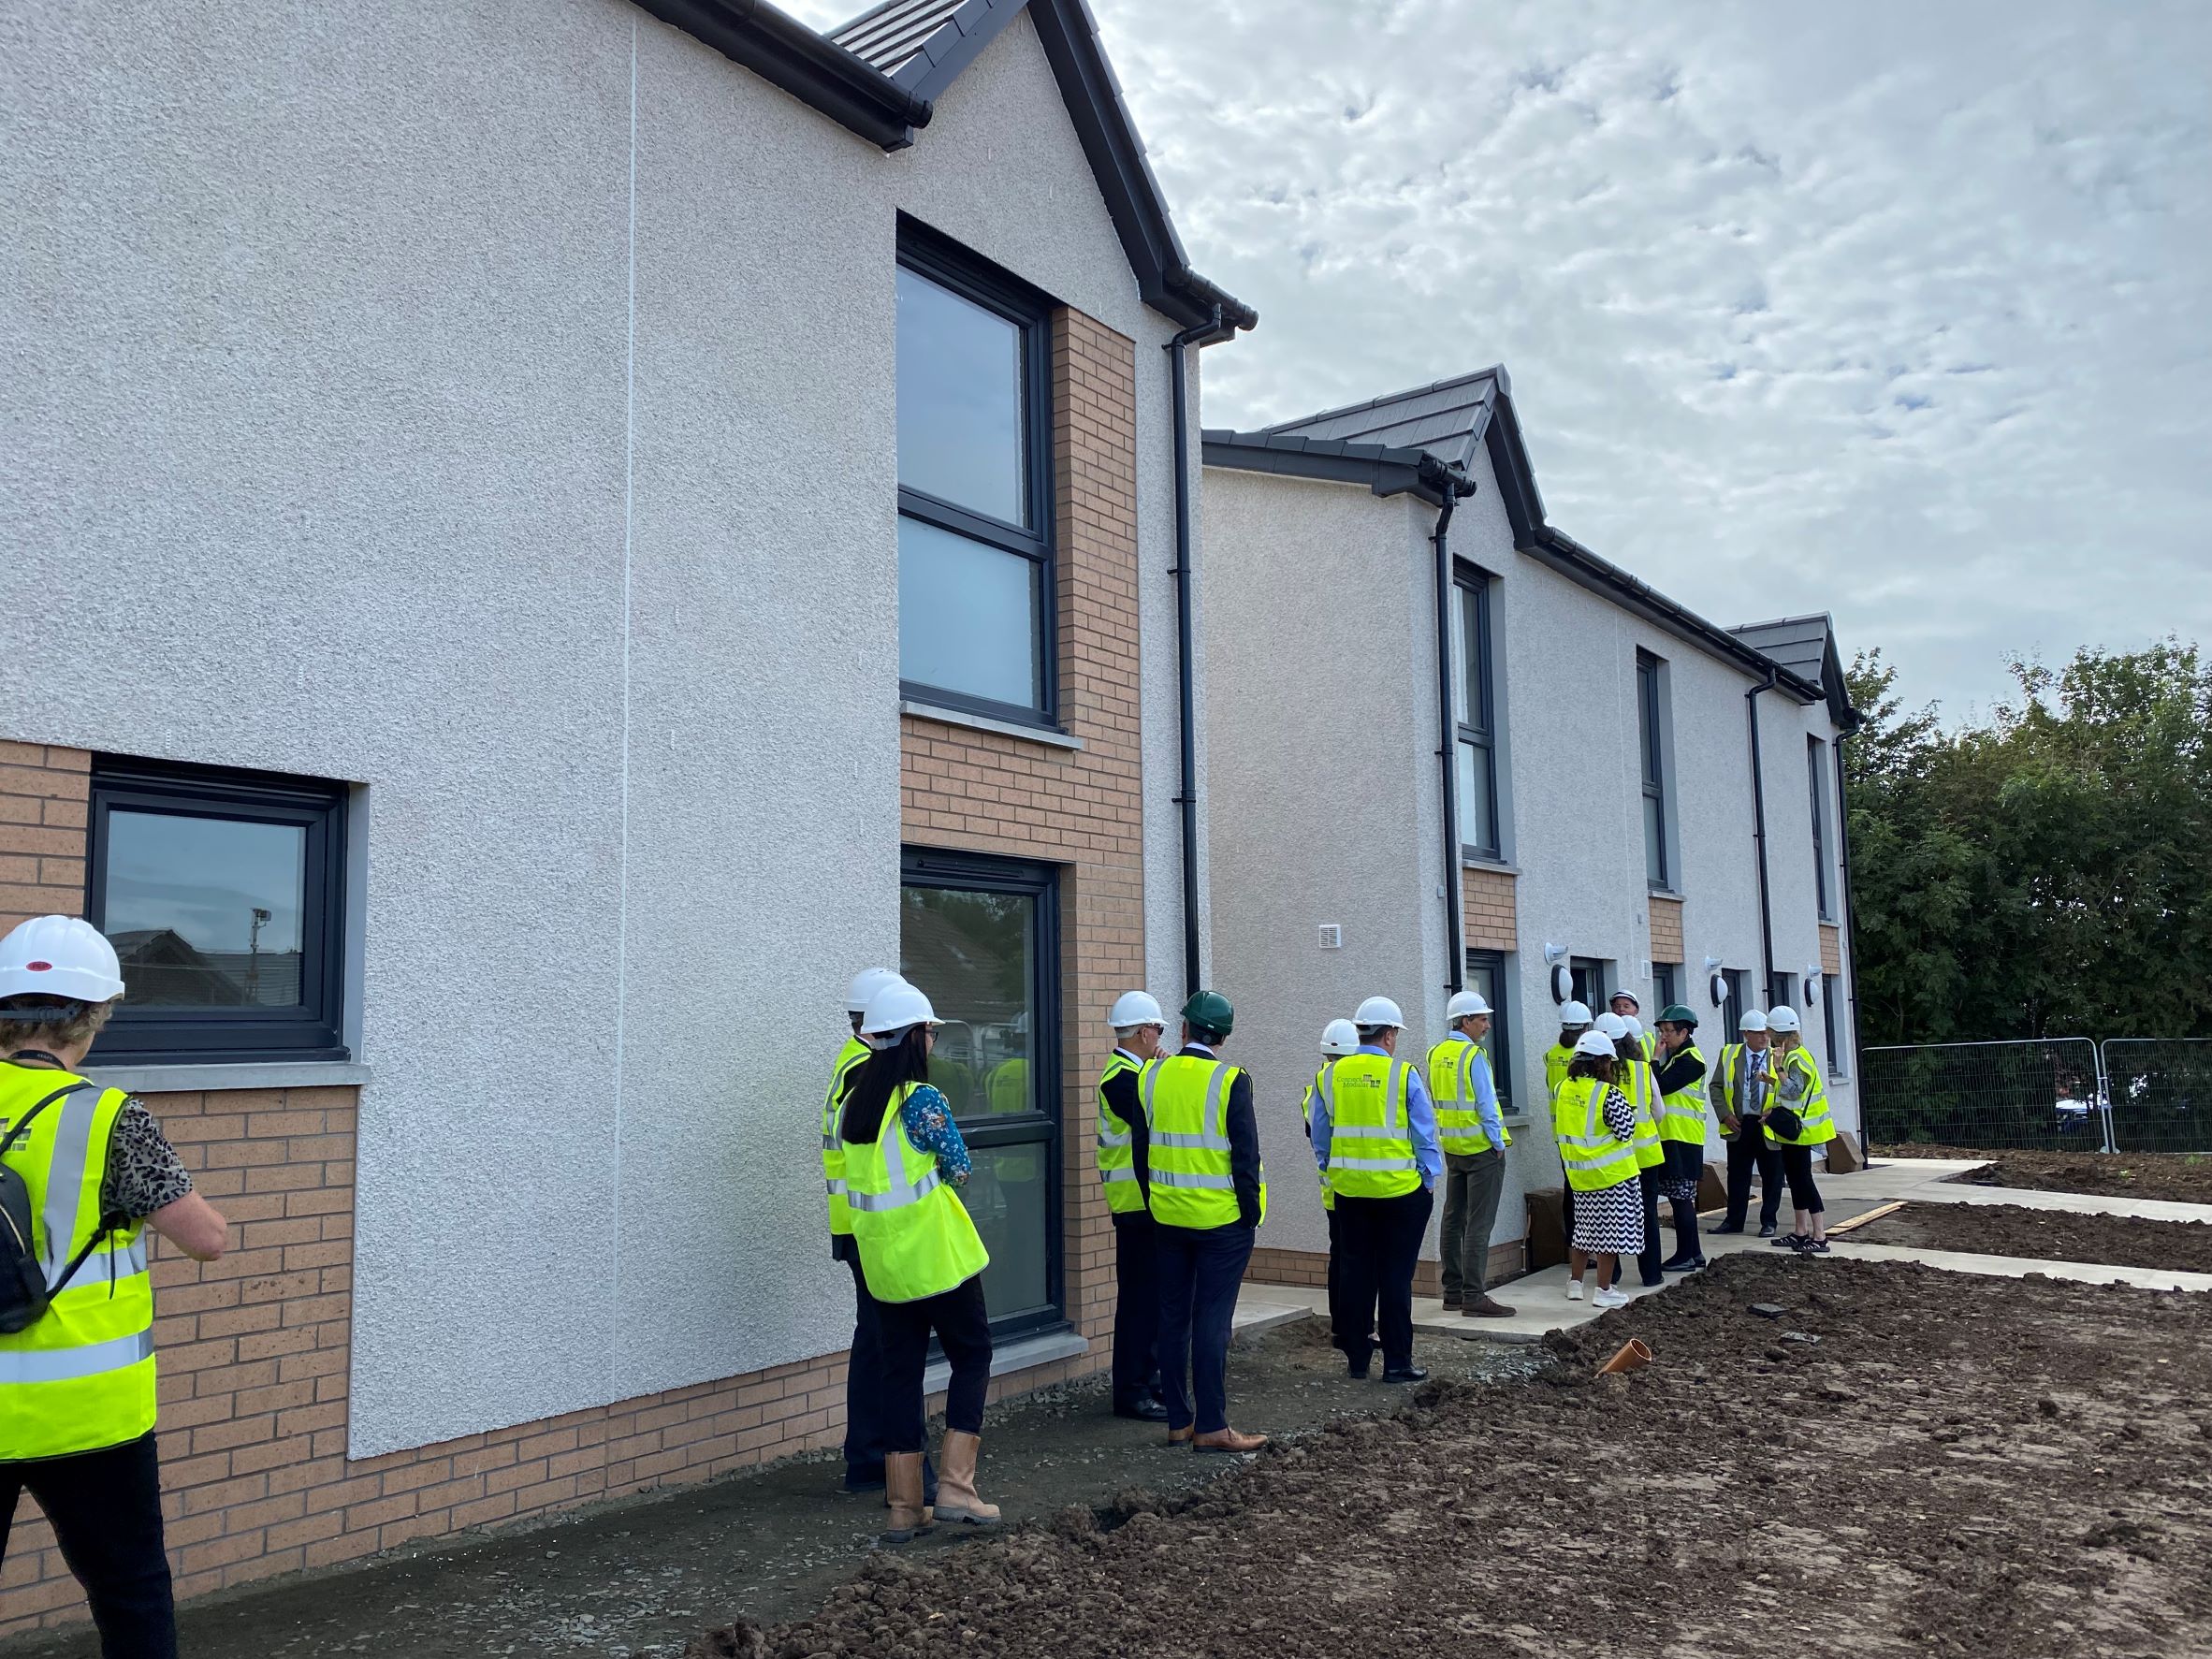 South Ayrshire modular homes on track for first tenants